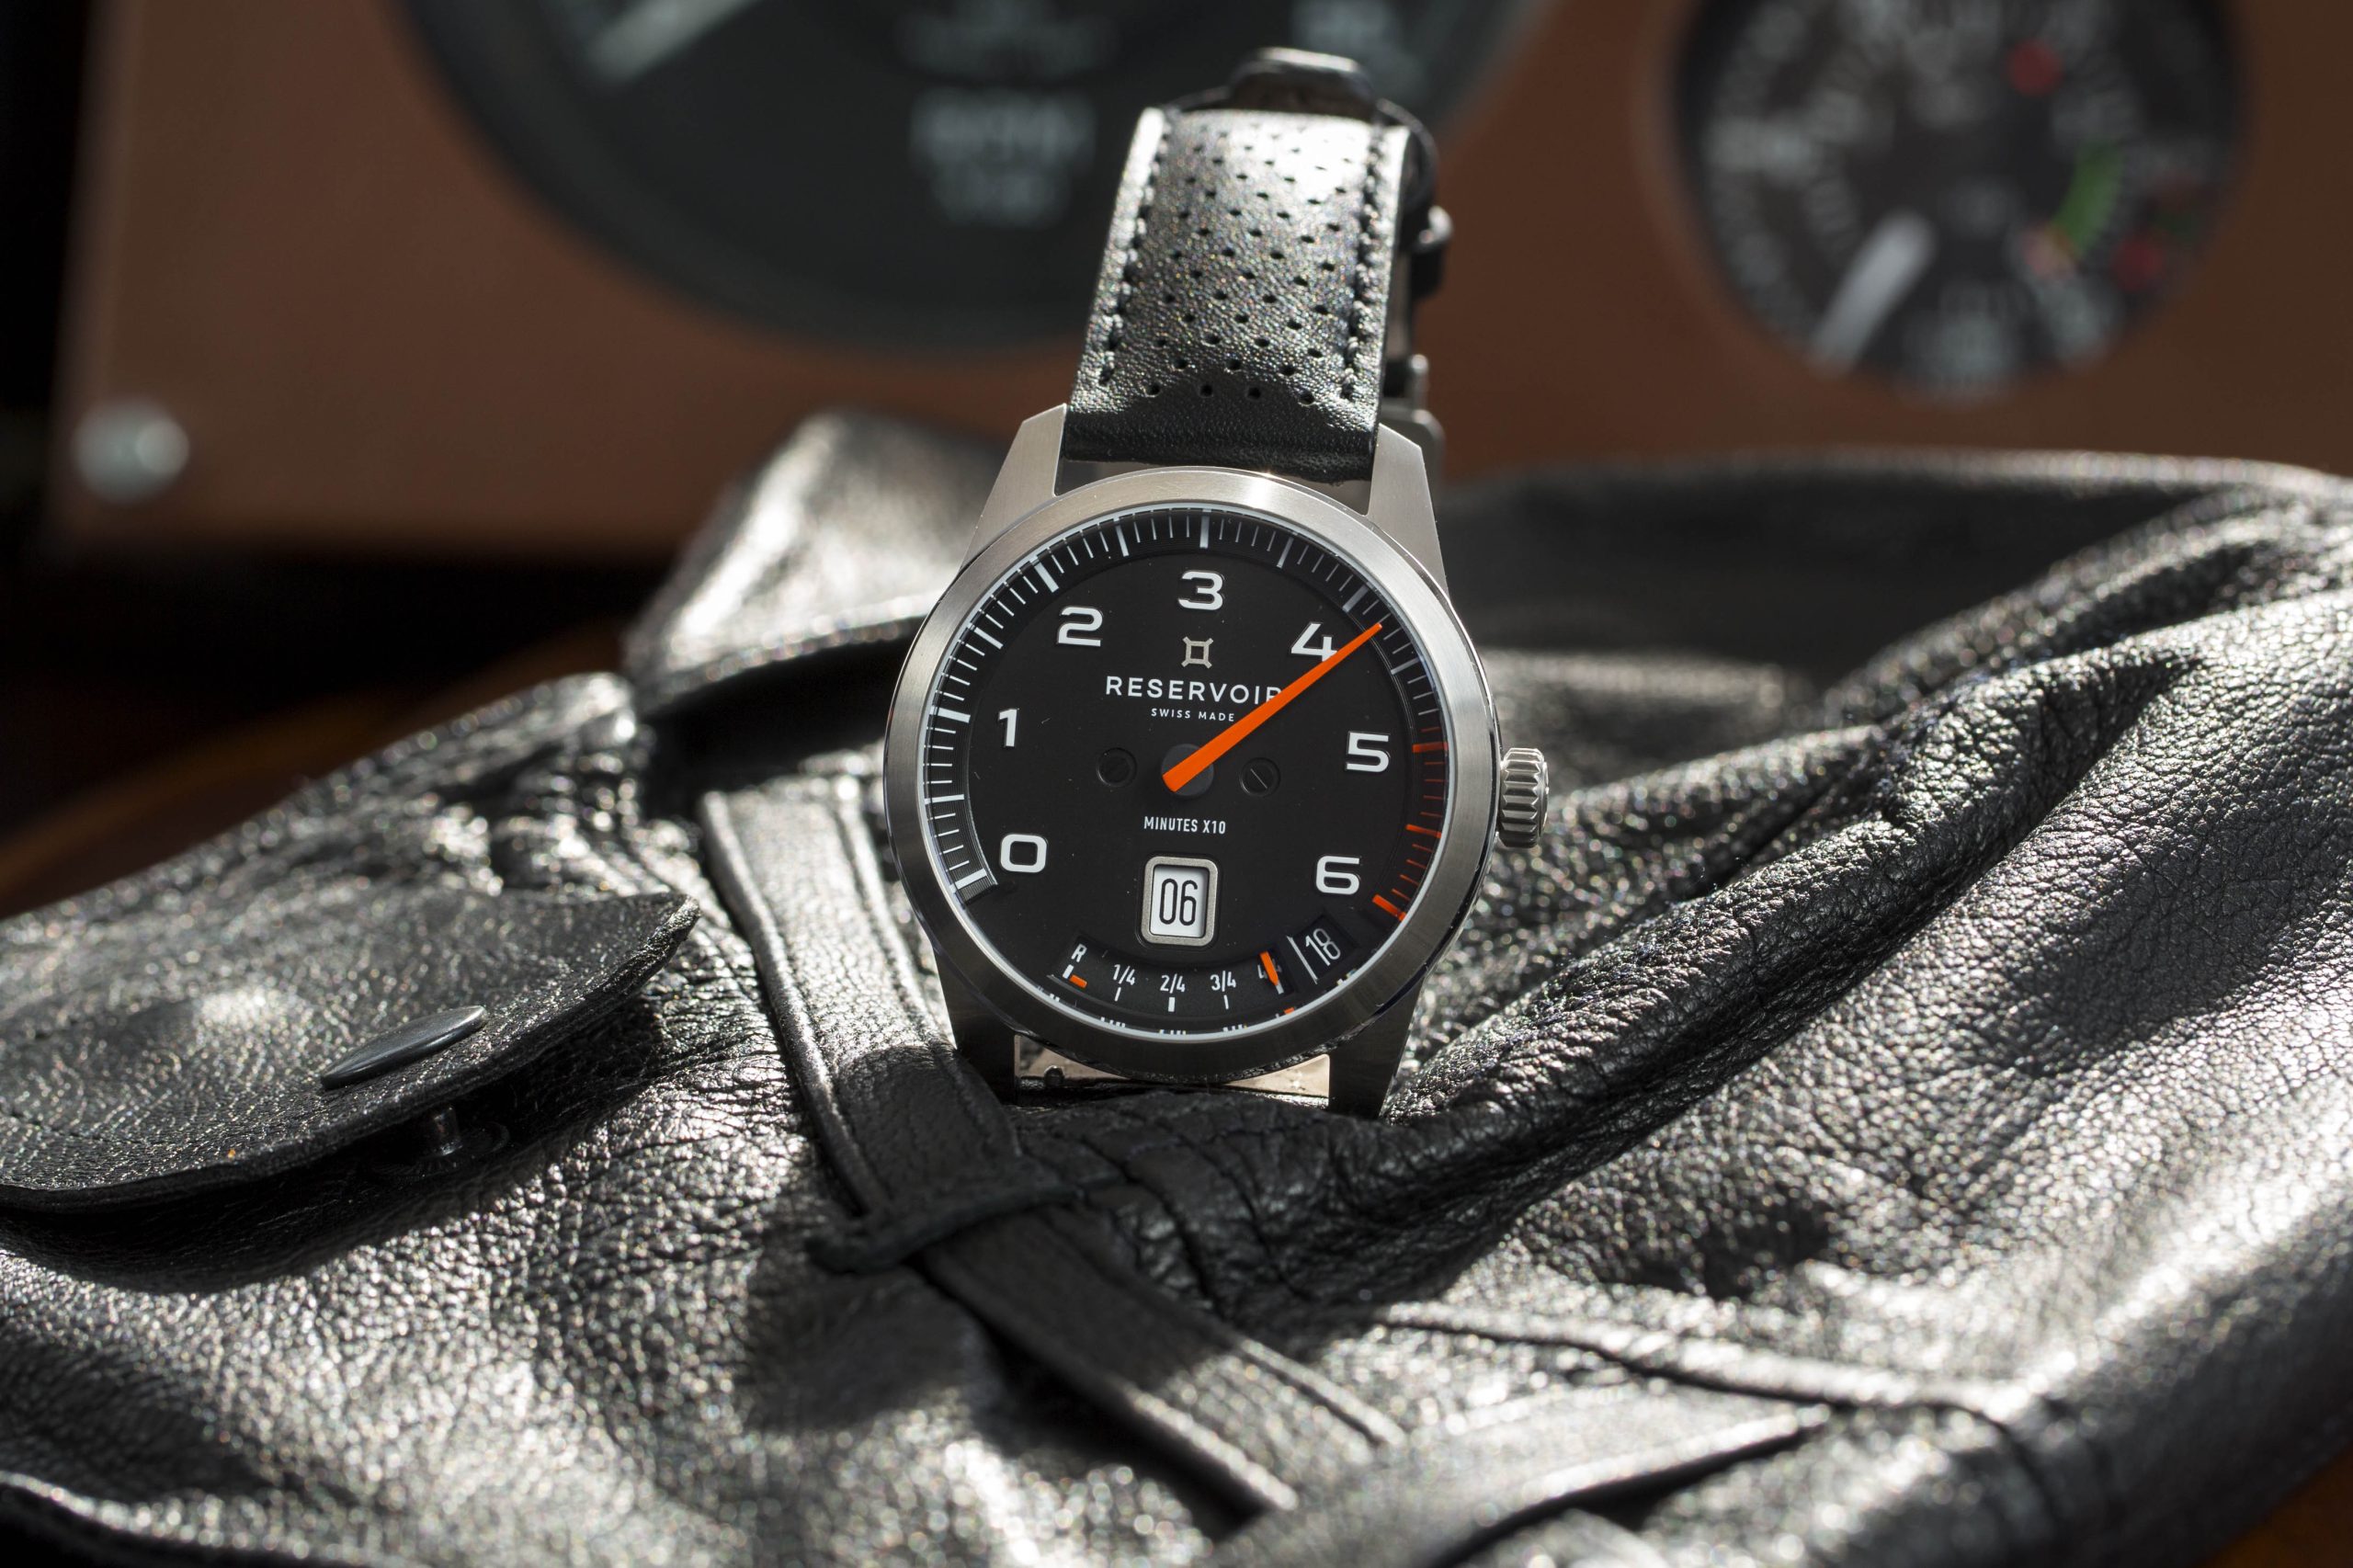 The GT Tour in steel, inspired by legendary car races.